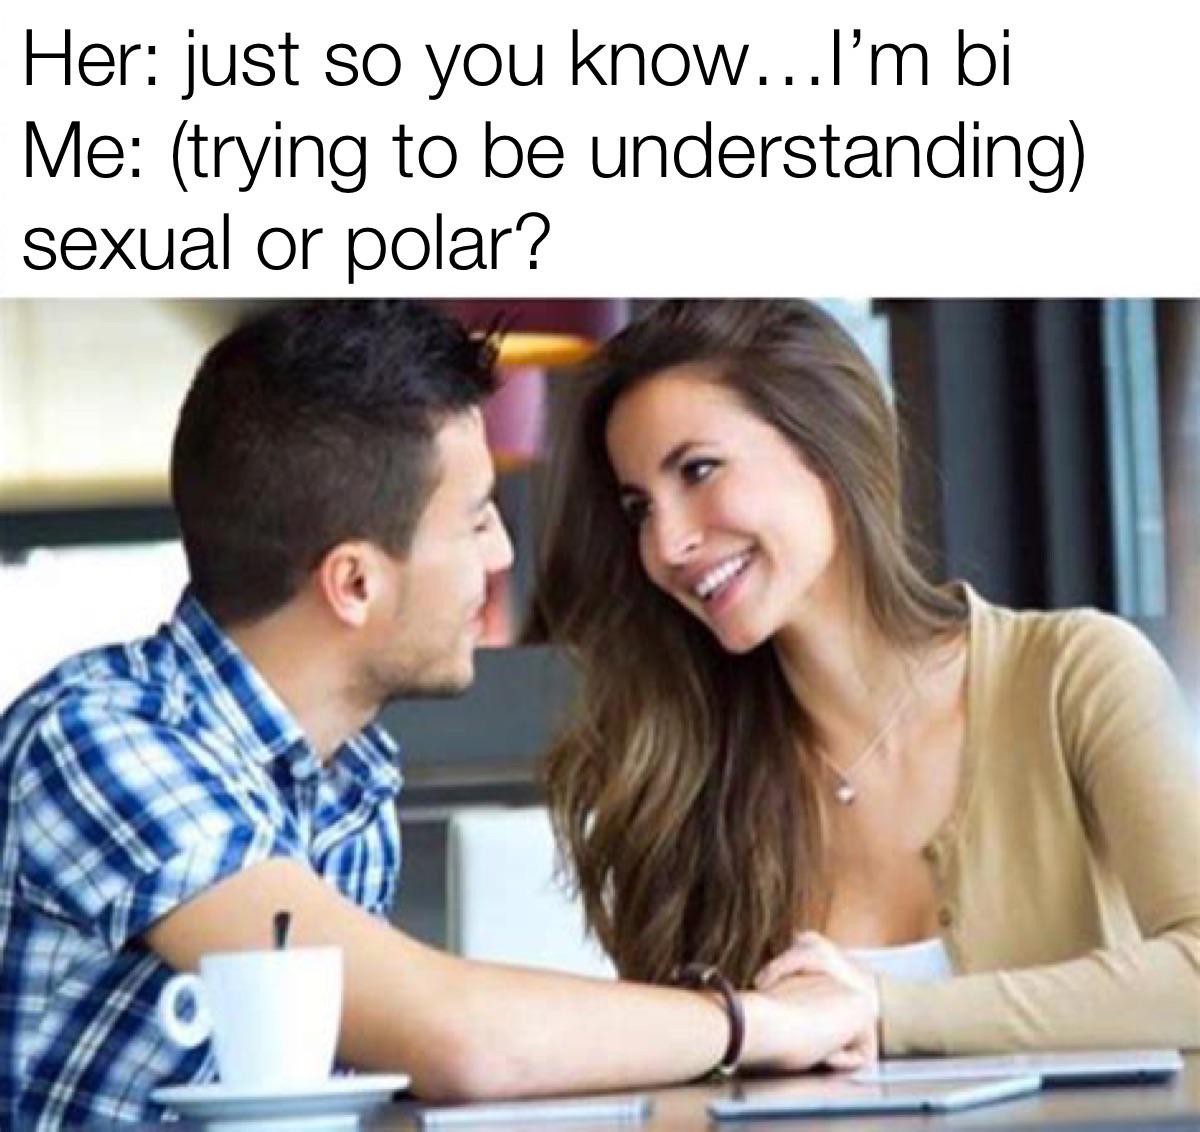 funny and dank memes - me trying to impress her - Her just so you know...I'm bi understanding Me trying to be sexual or polar?